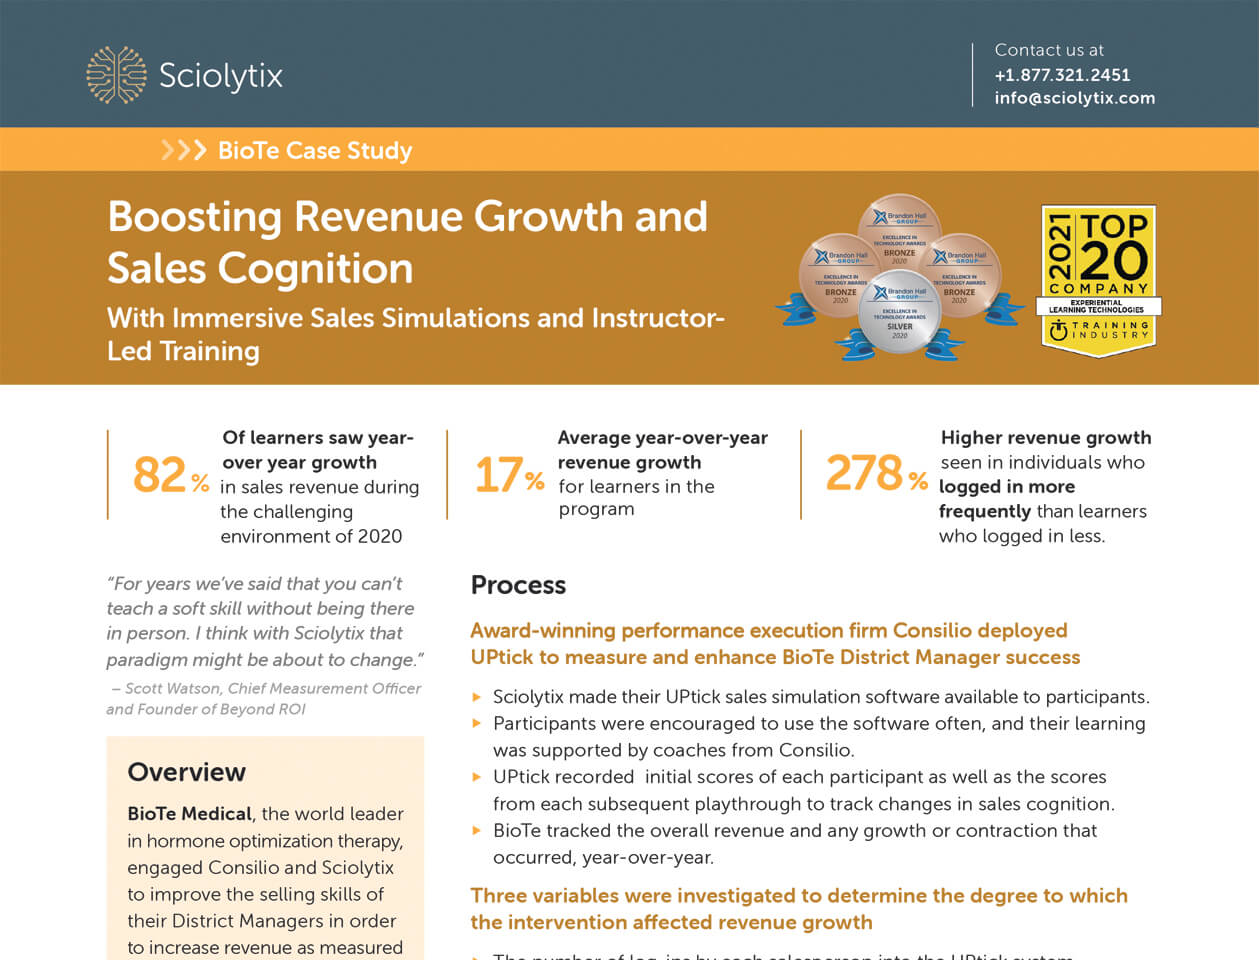 Boosting Revenue Growth and Sales Cognition